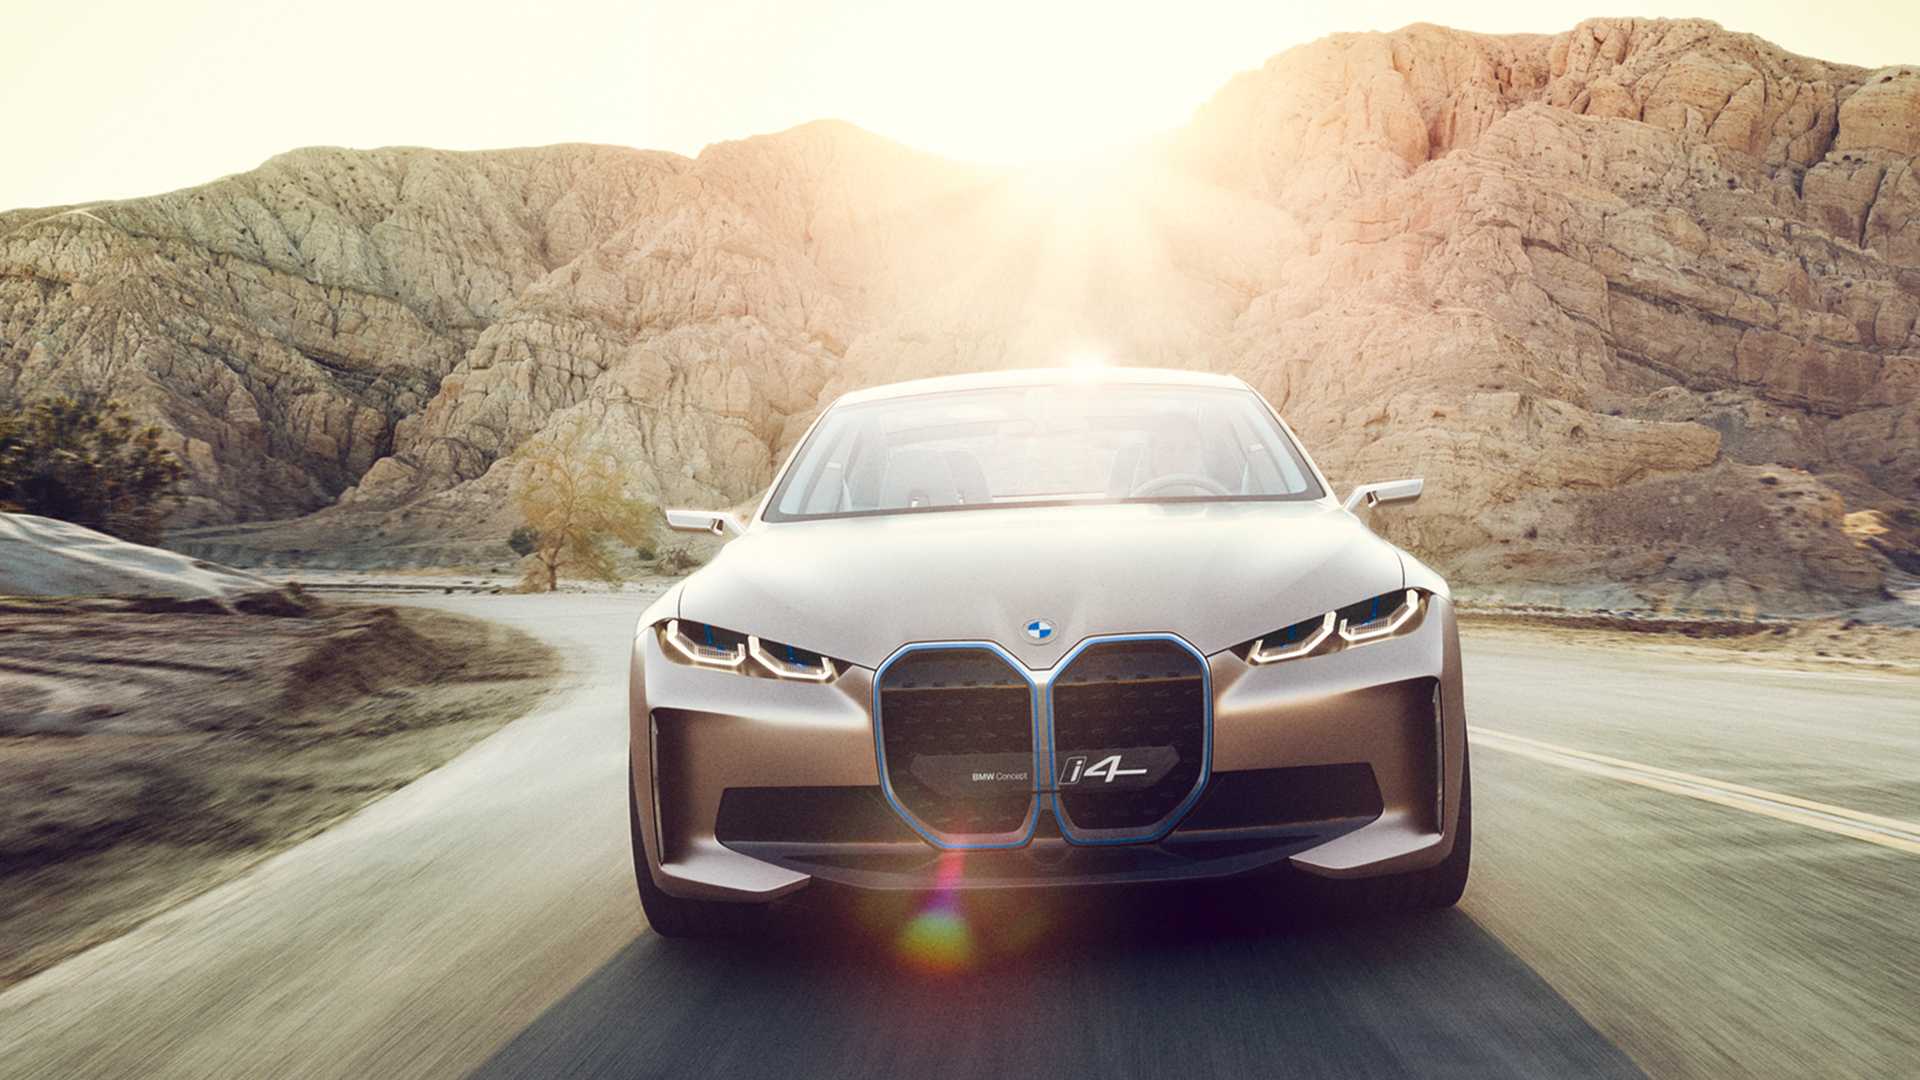 Bmw Subsido Concept Wallpapers